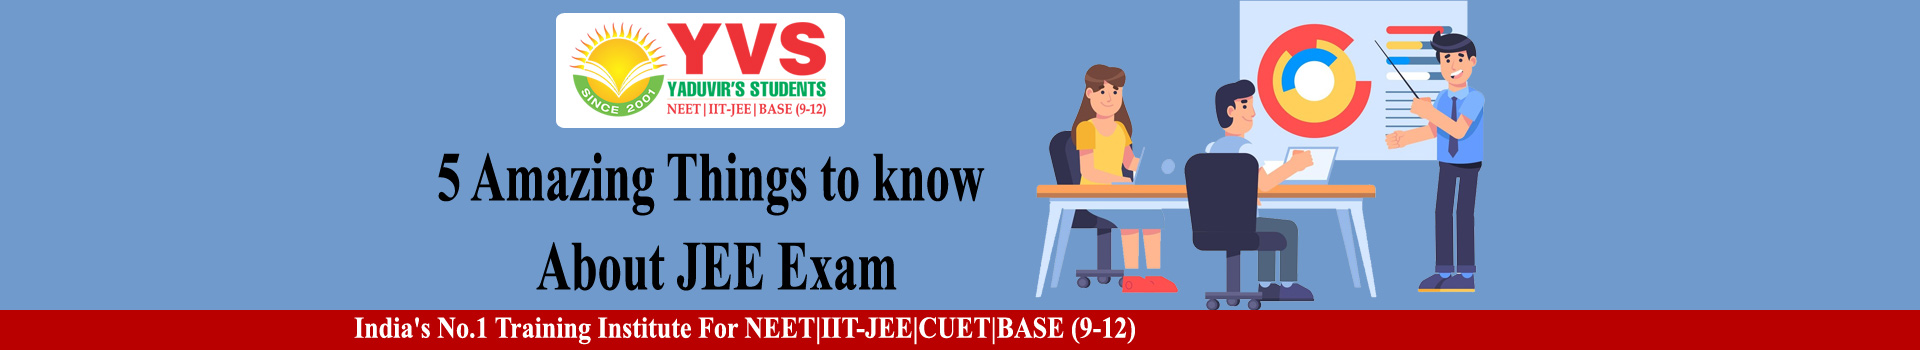 five-amazing-things-to-know-about-jee-exam